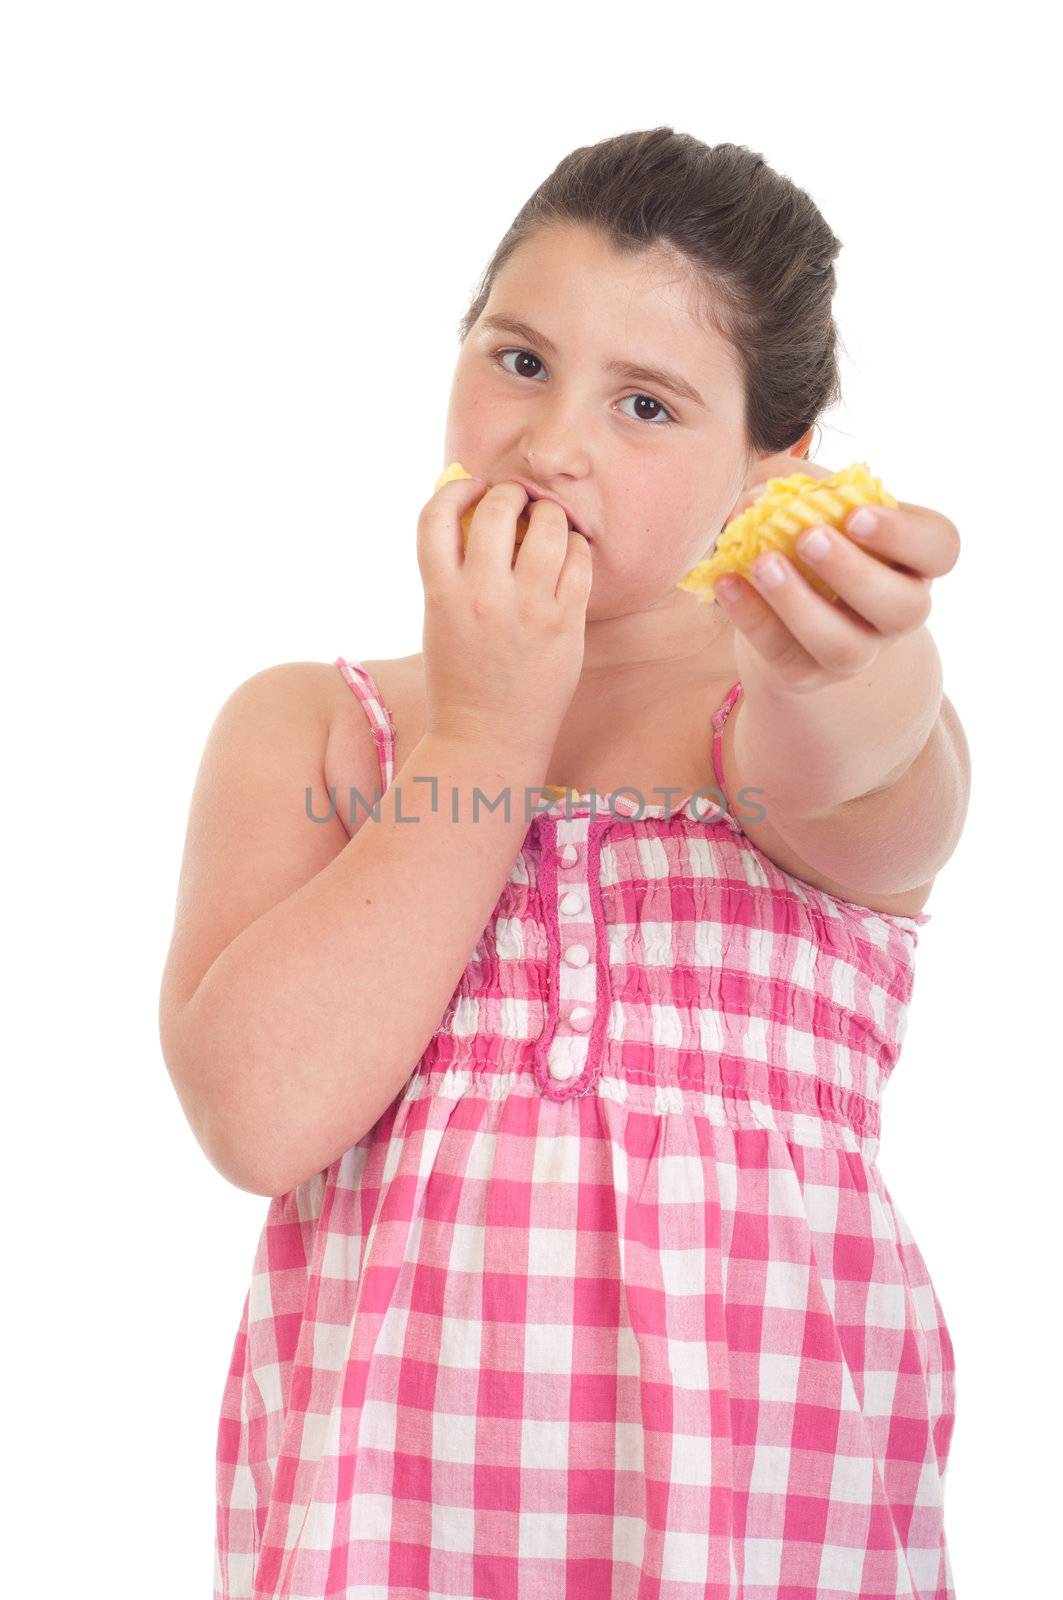 cute little girl eating chips and offering some too (isolated on white background)